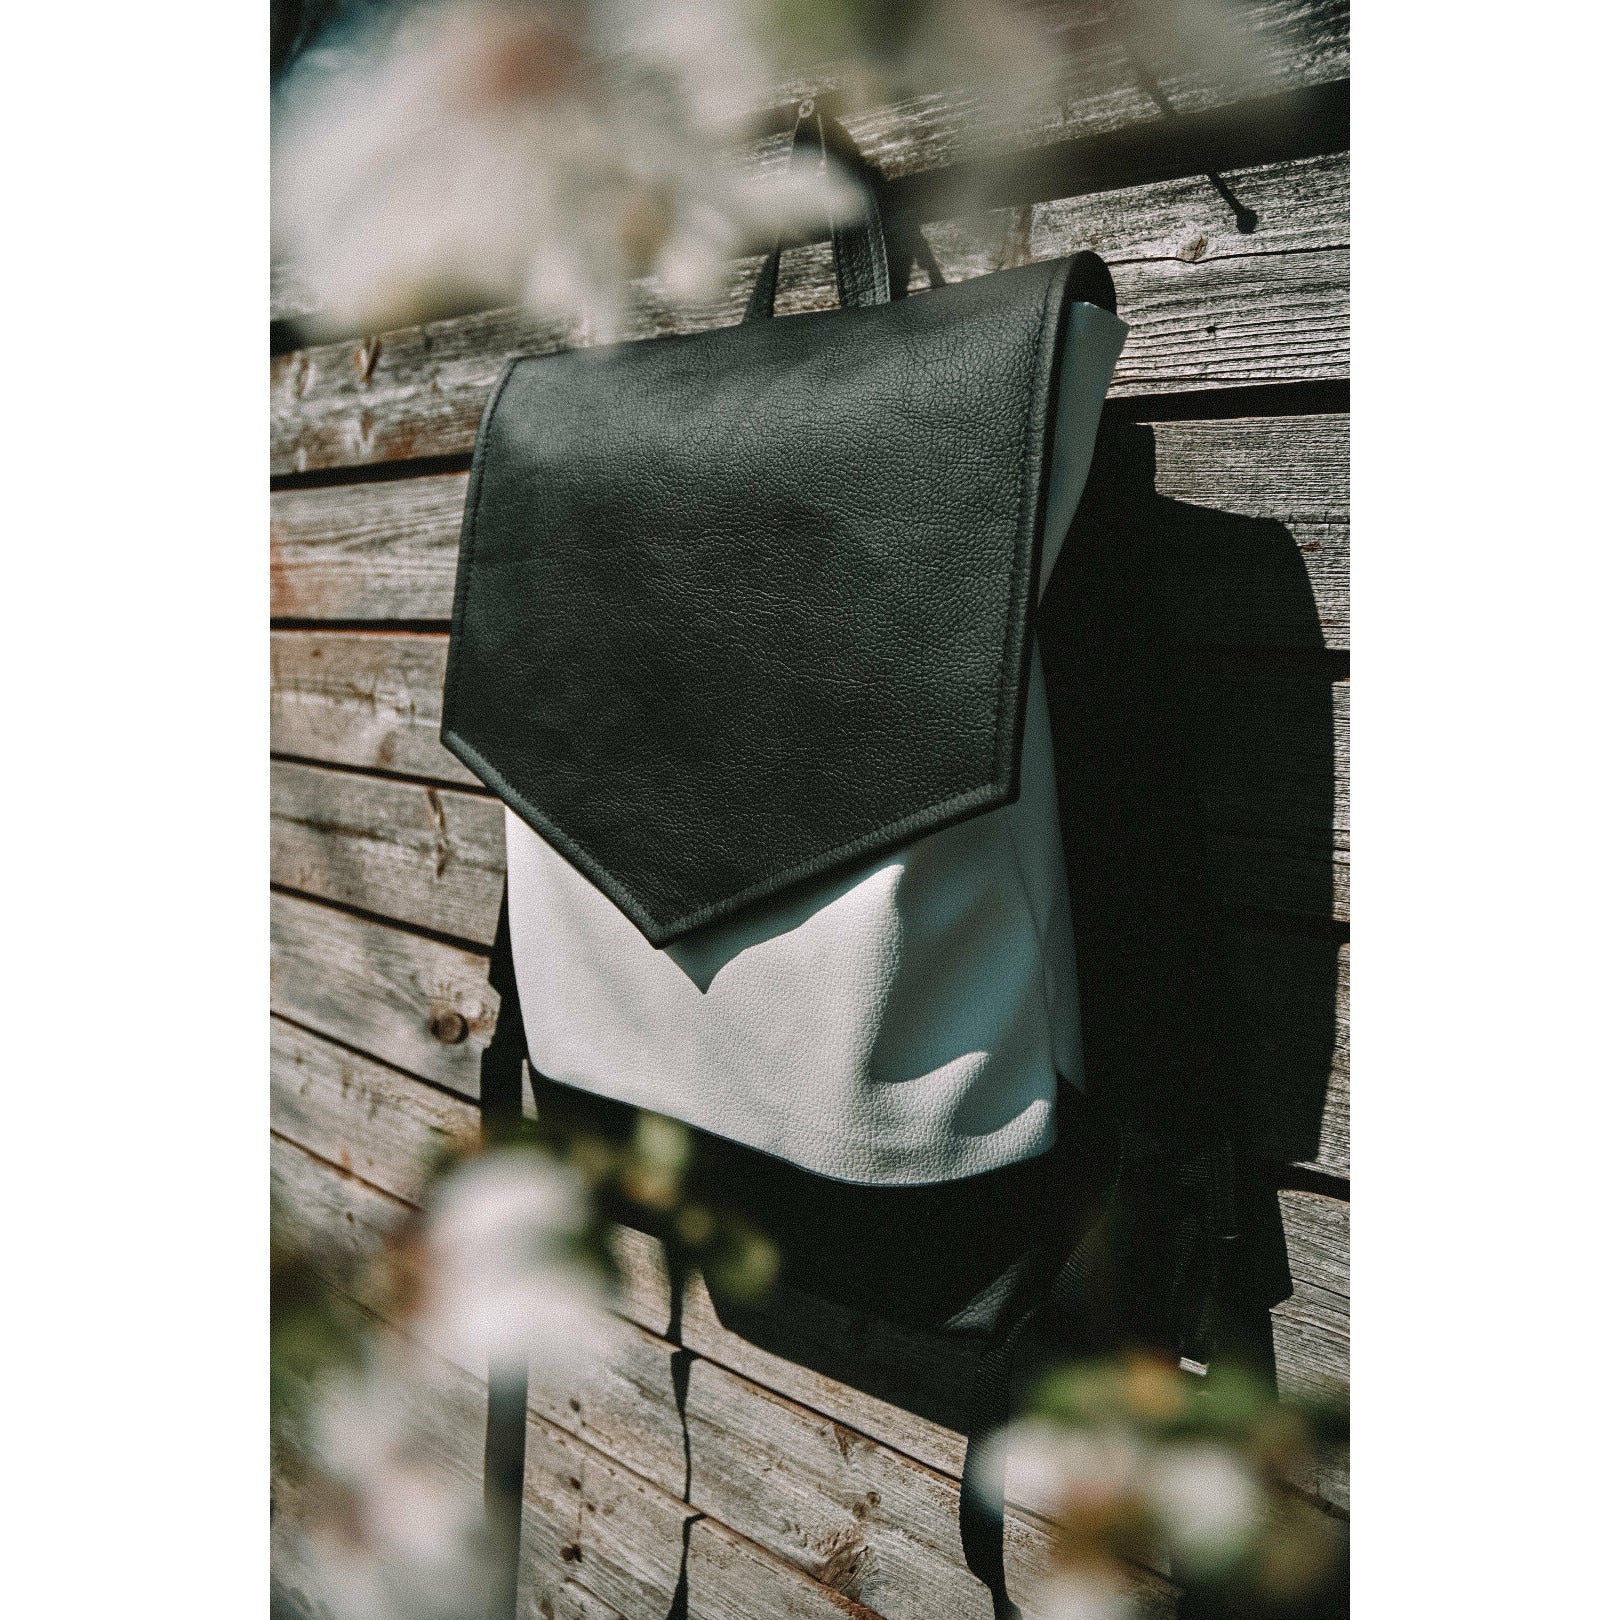 Brand New Deux Lux Demi Backpack MSRP $75